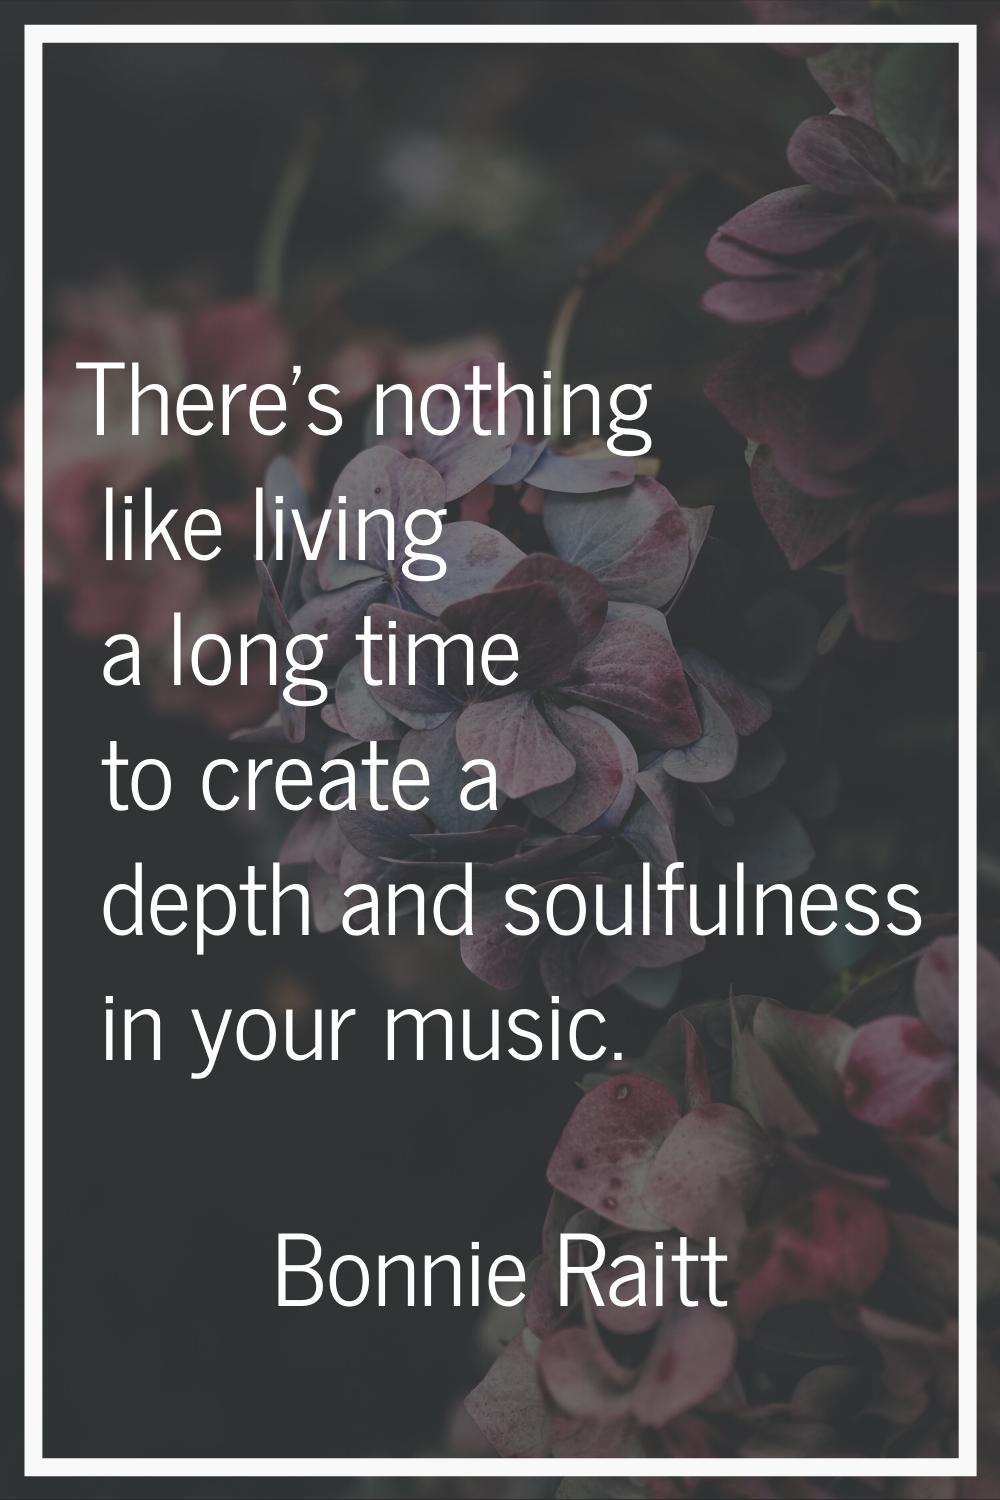 There's nothing like living a long time to create a depth and soulfulness in your music.